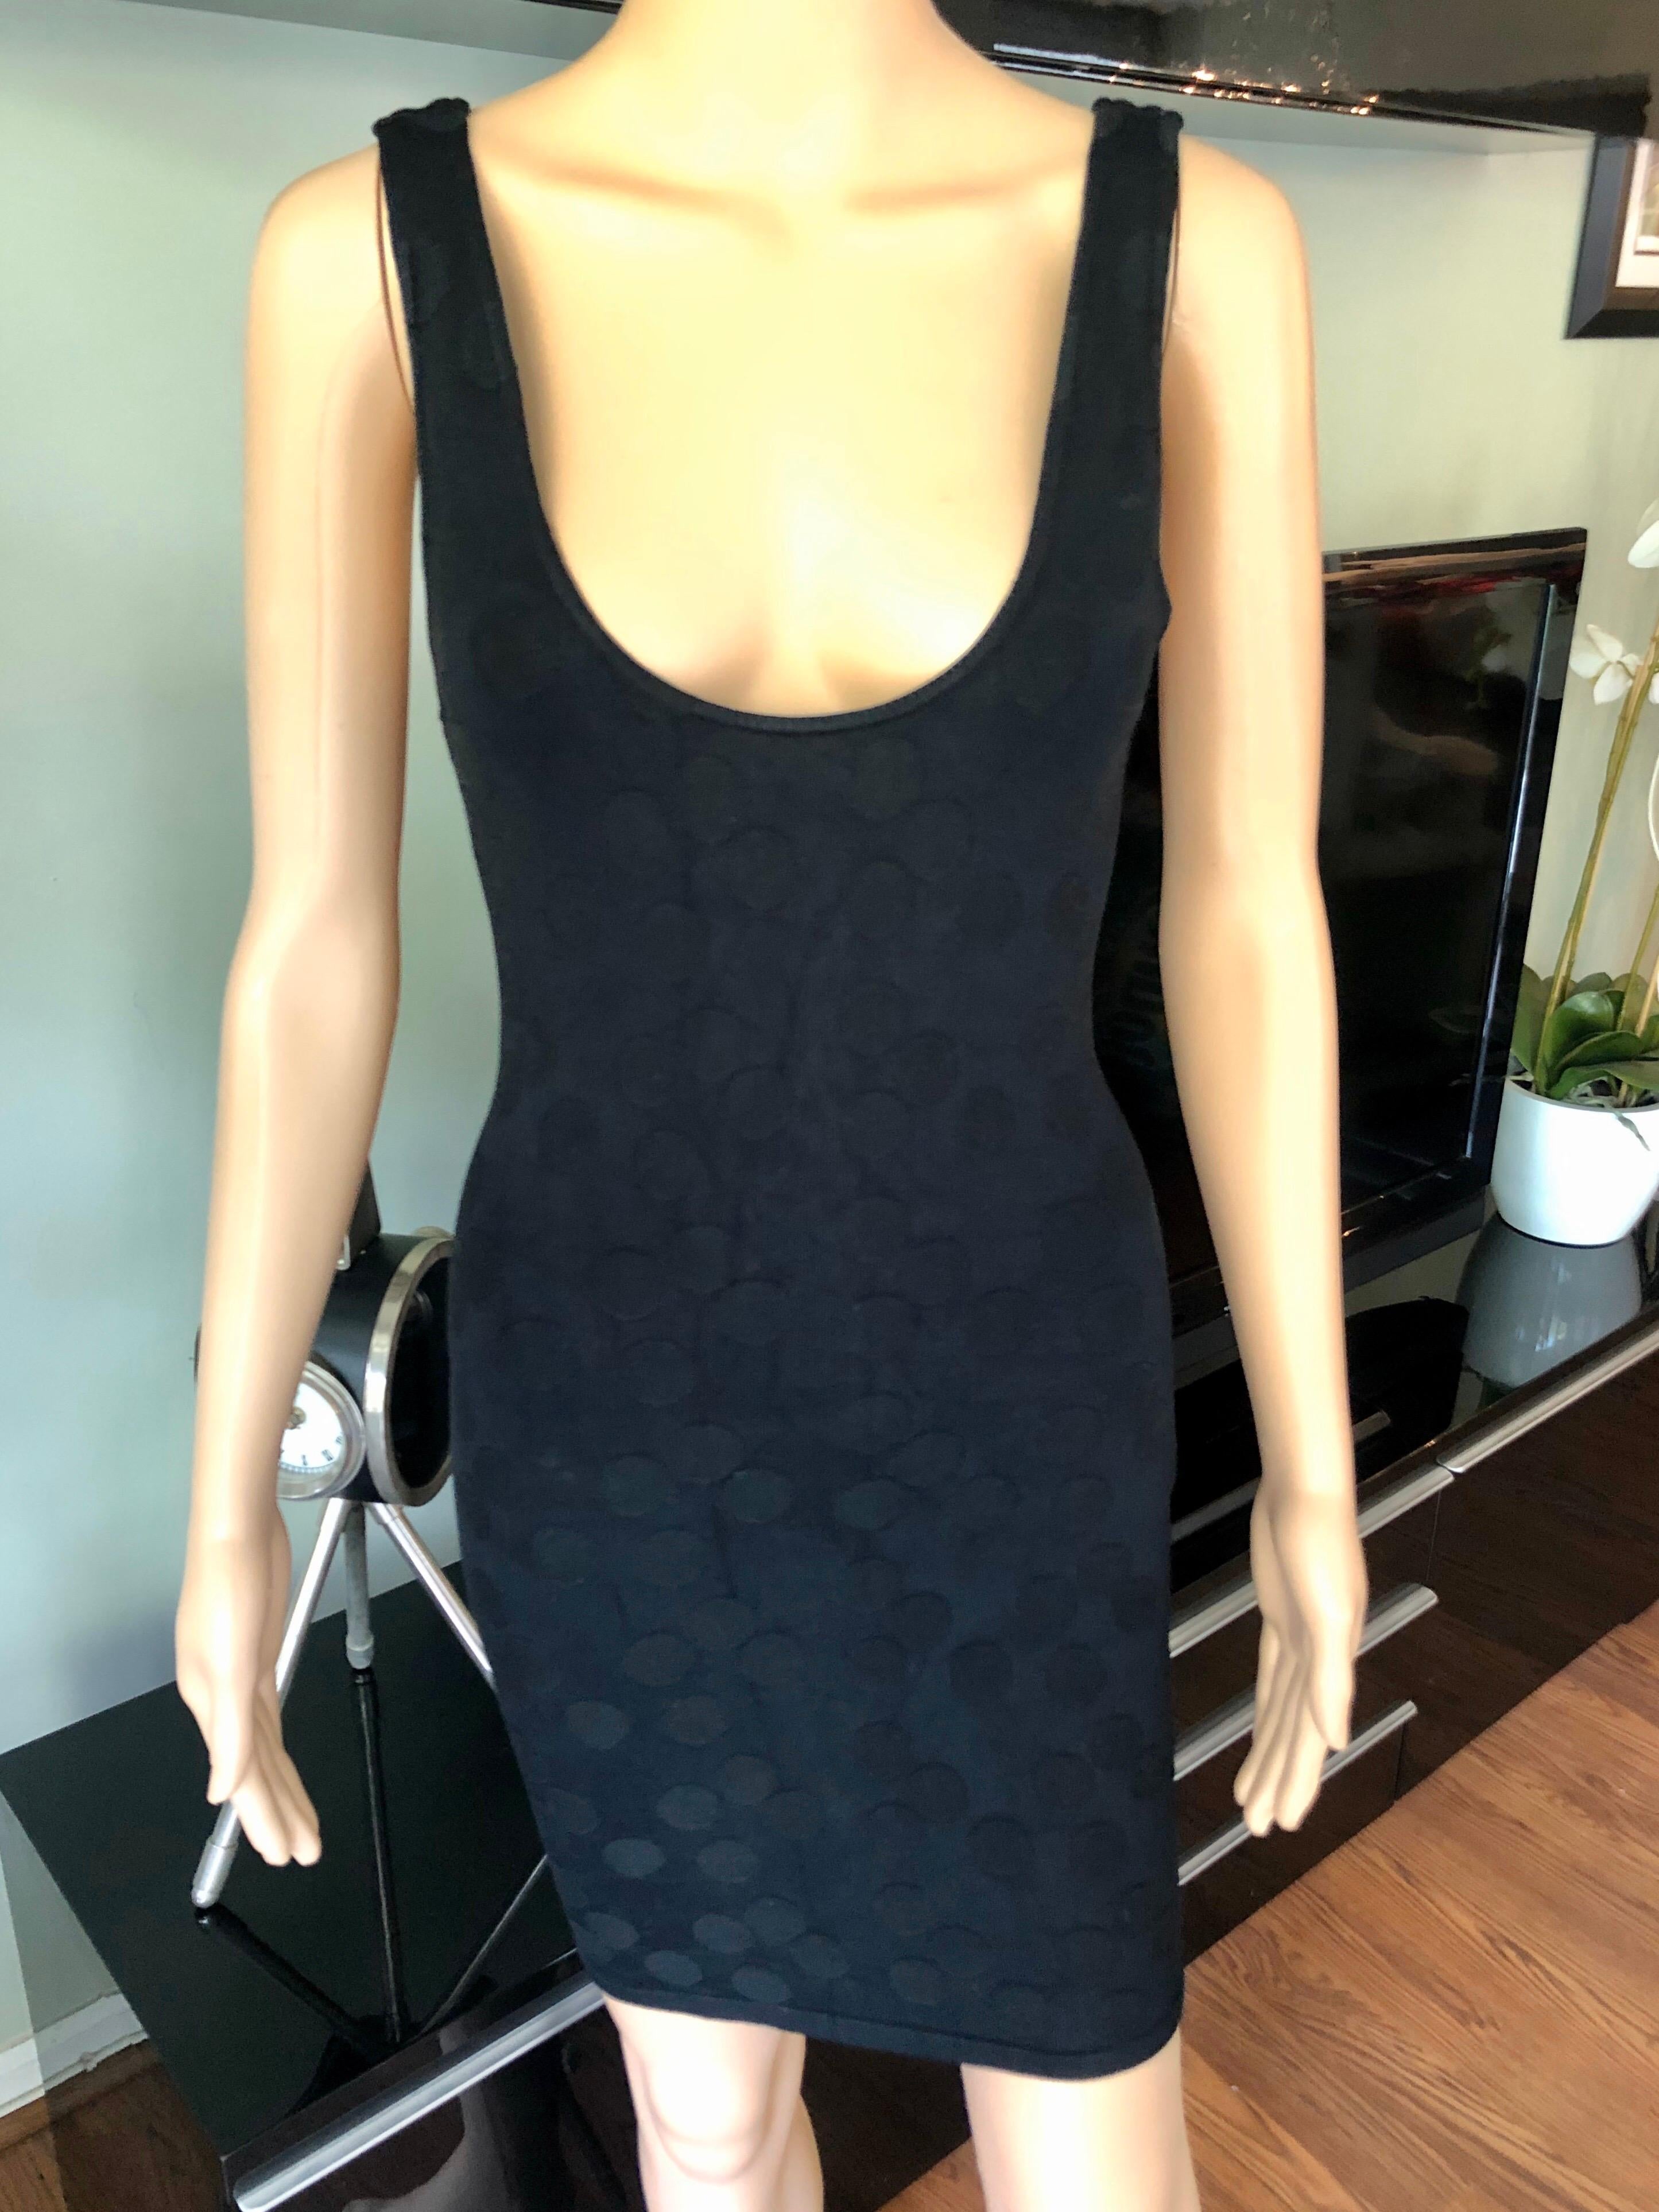 Azzedine Alaia S/S 1991 Vintage Bodycon Open Back Polka Dot Black Mini Dress 

Size L - runs small

Alaïa bodycon mini dress with textured polka dot print throughout, low back and scoop neck.
